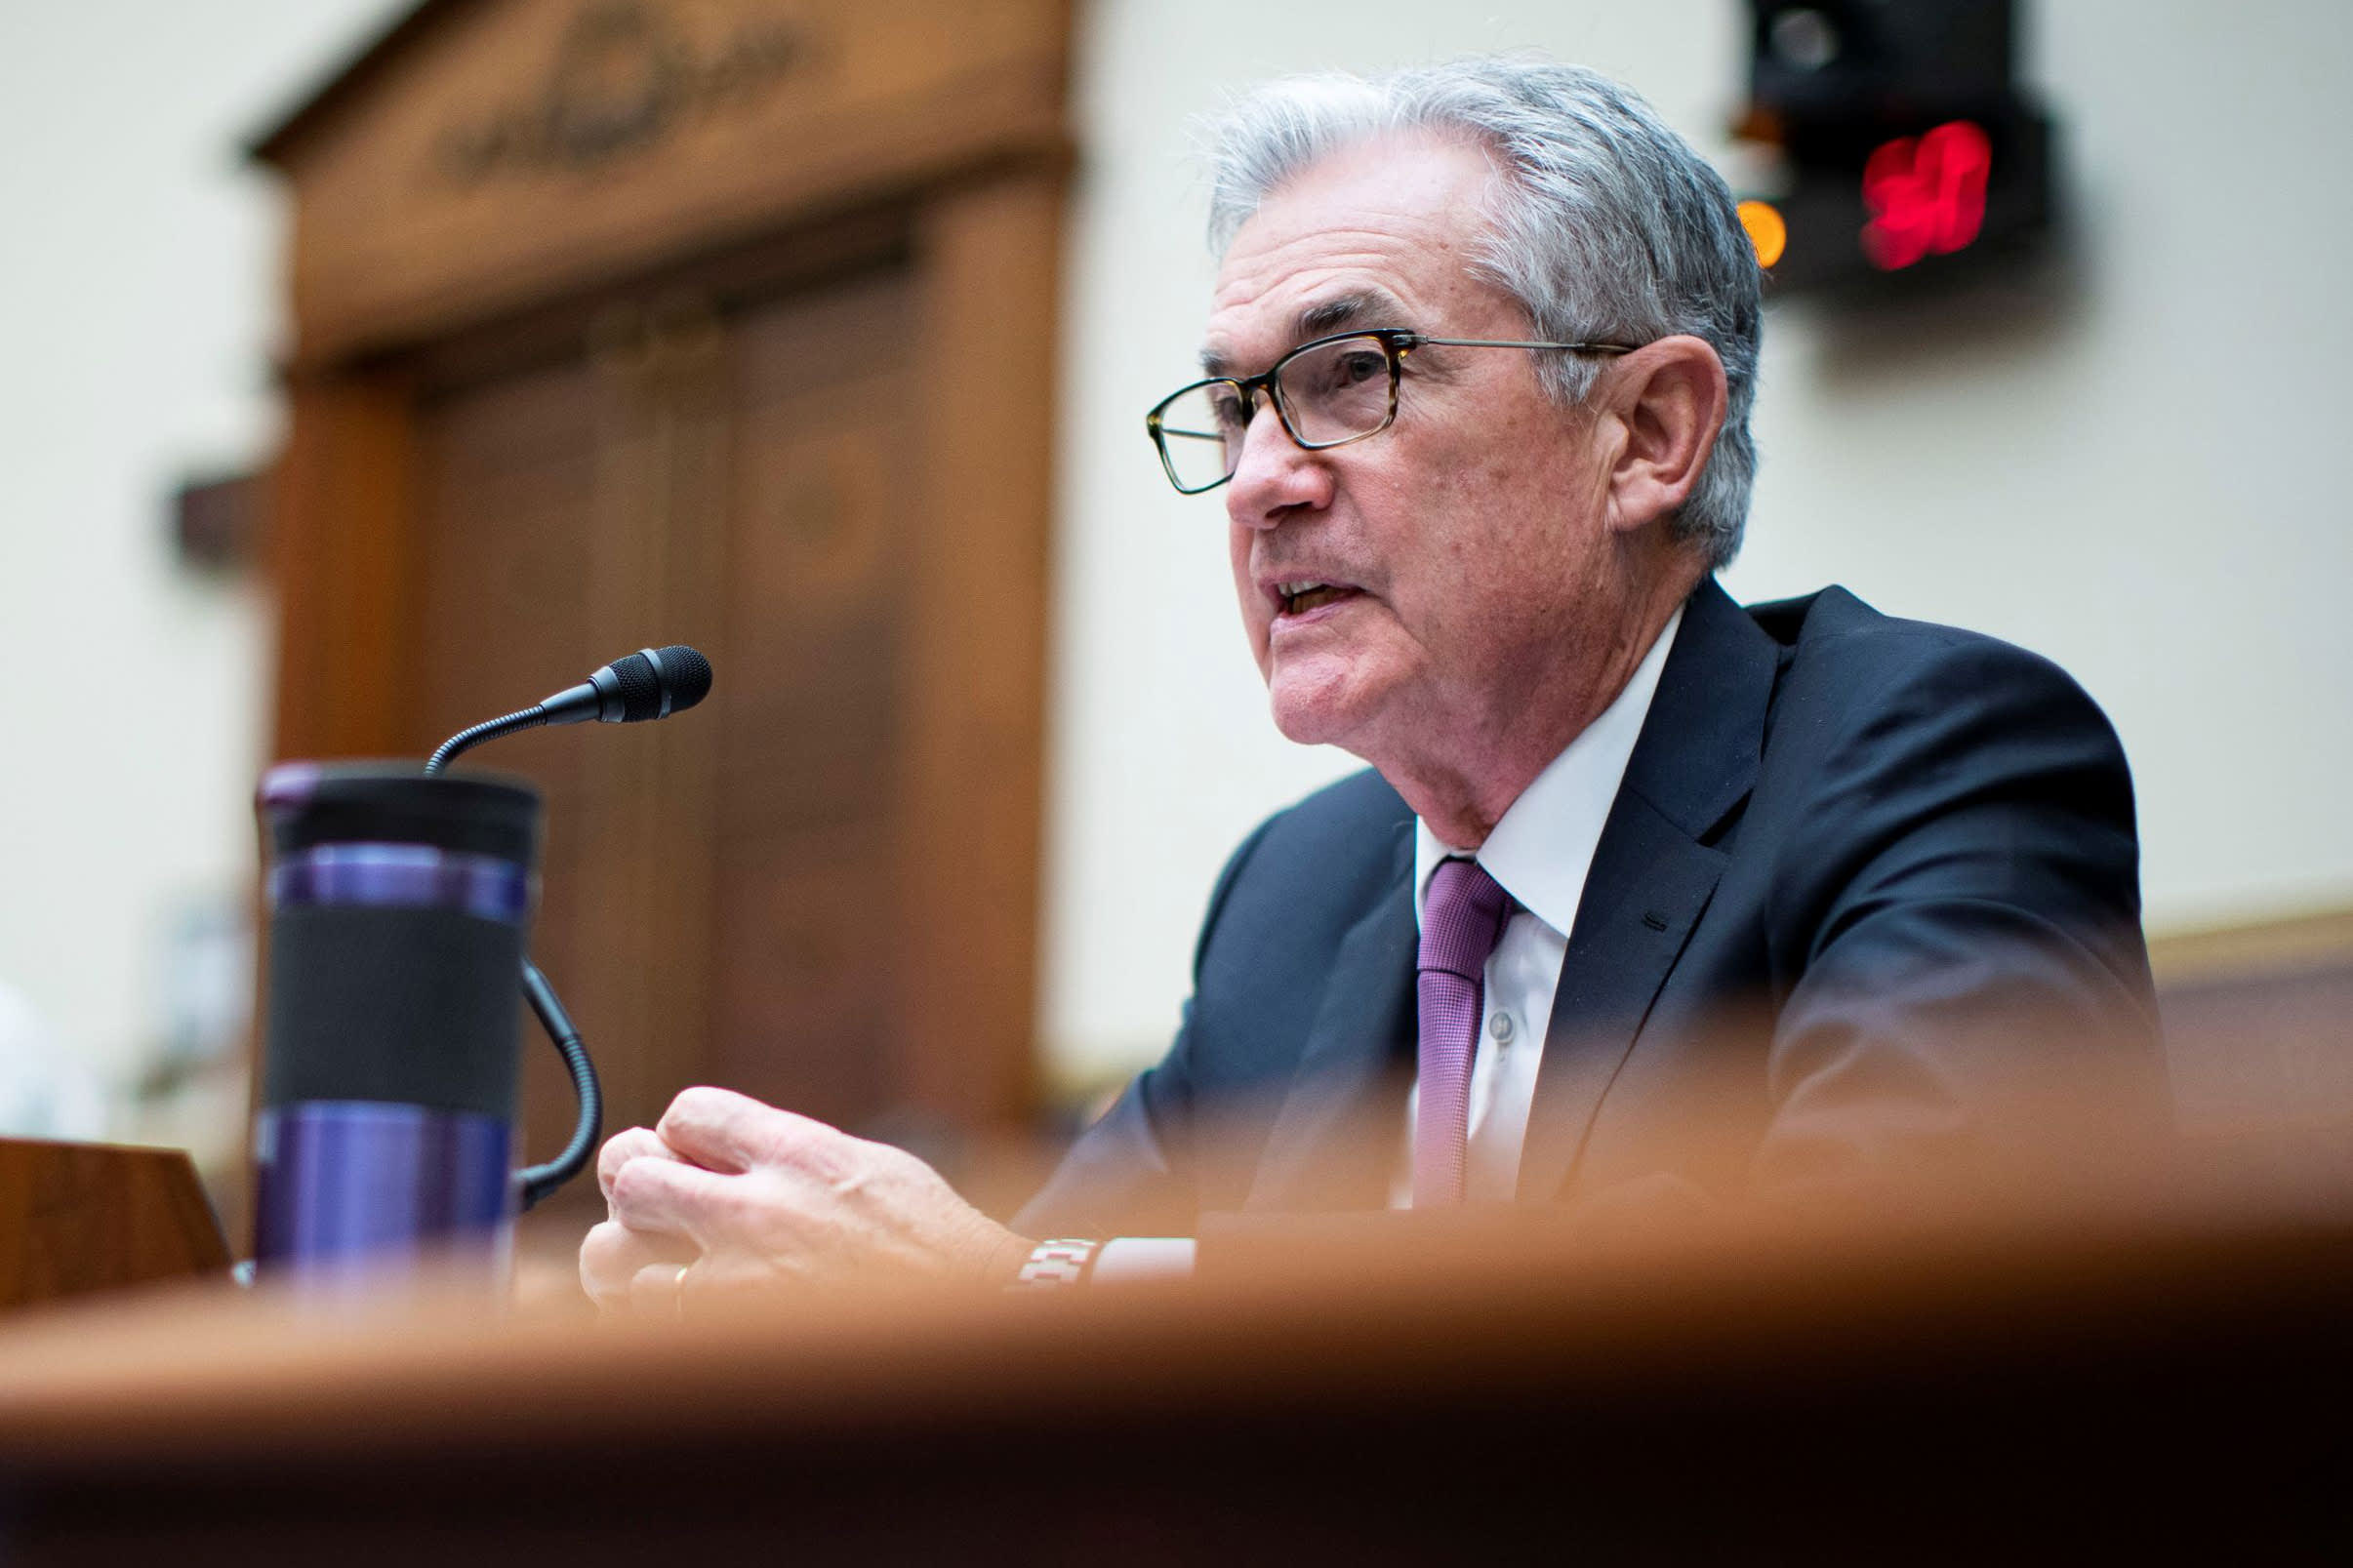 Fed is expected to speed up end of bond buying, signal rate hikes are coming